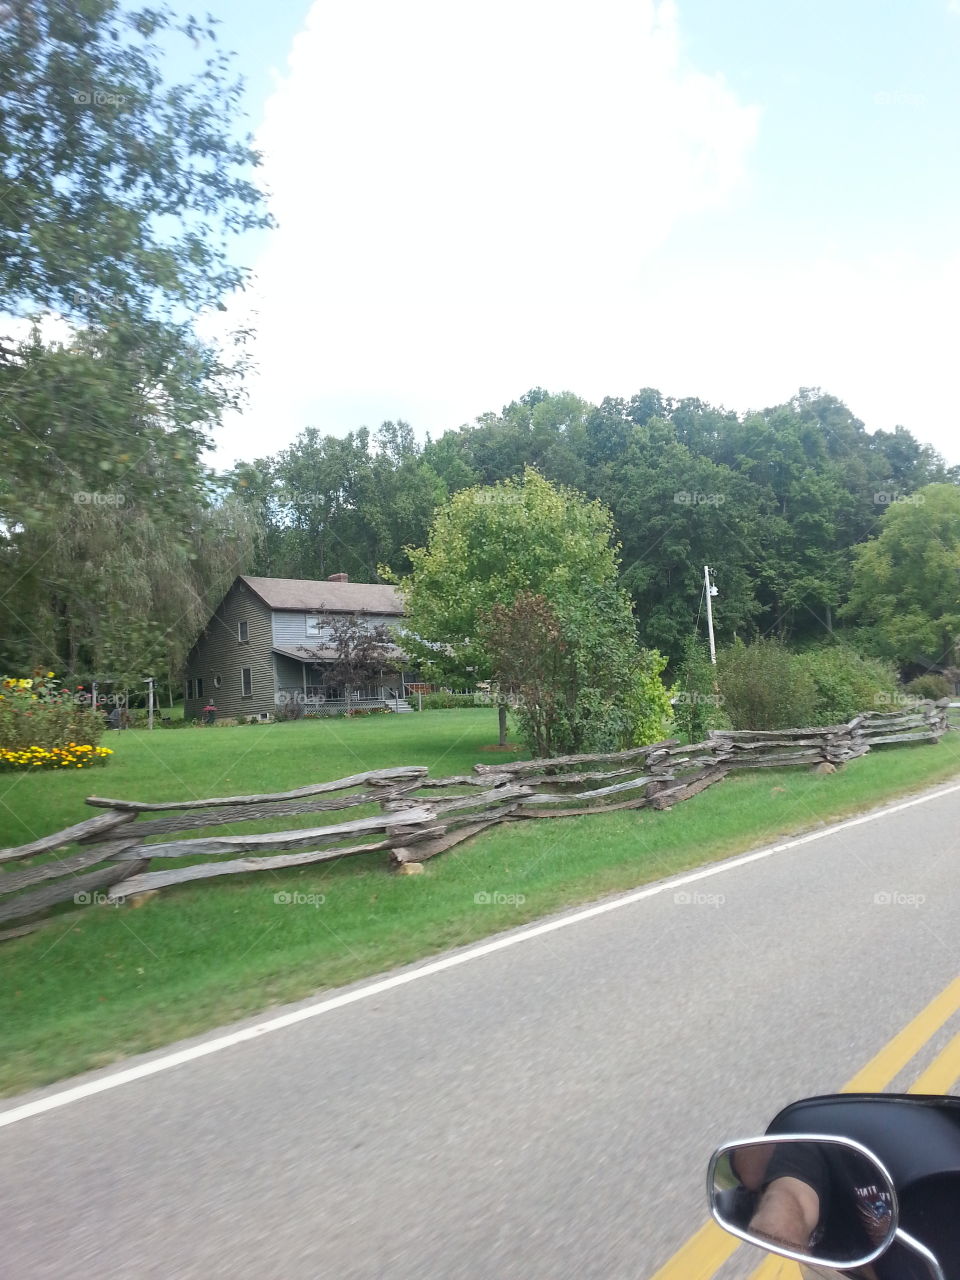 Woodland House. Cute house we pass going to our house in the Hocking Hills.